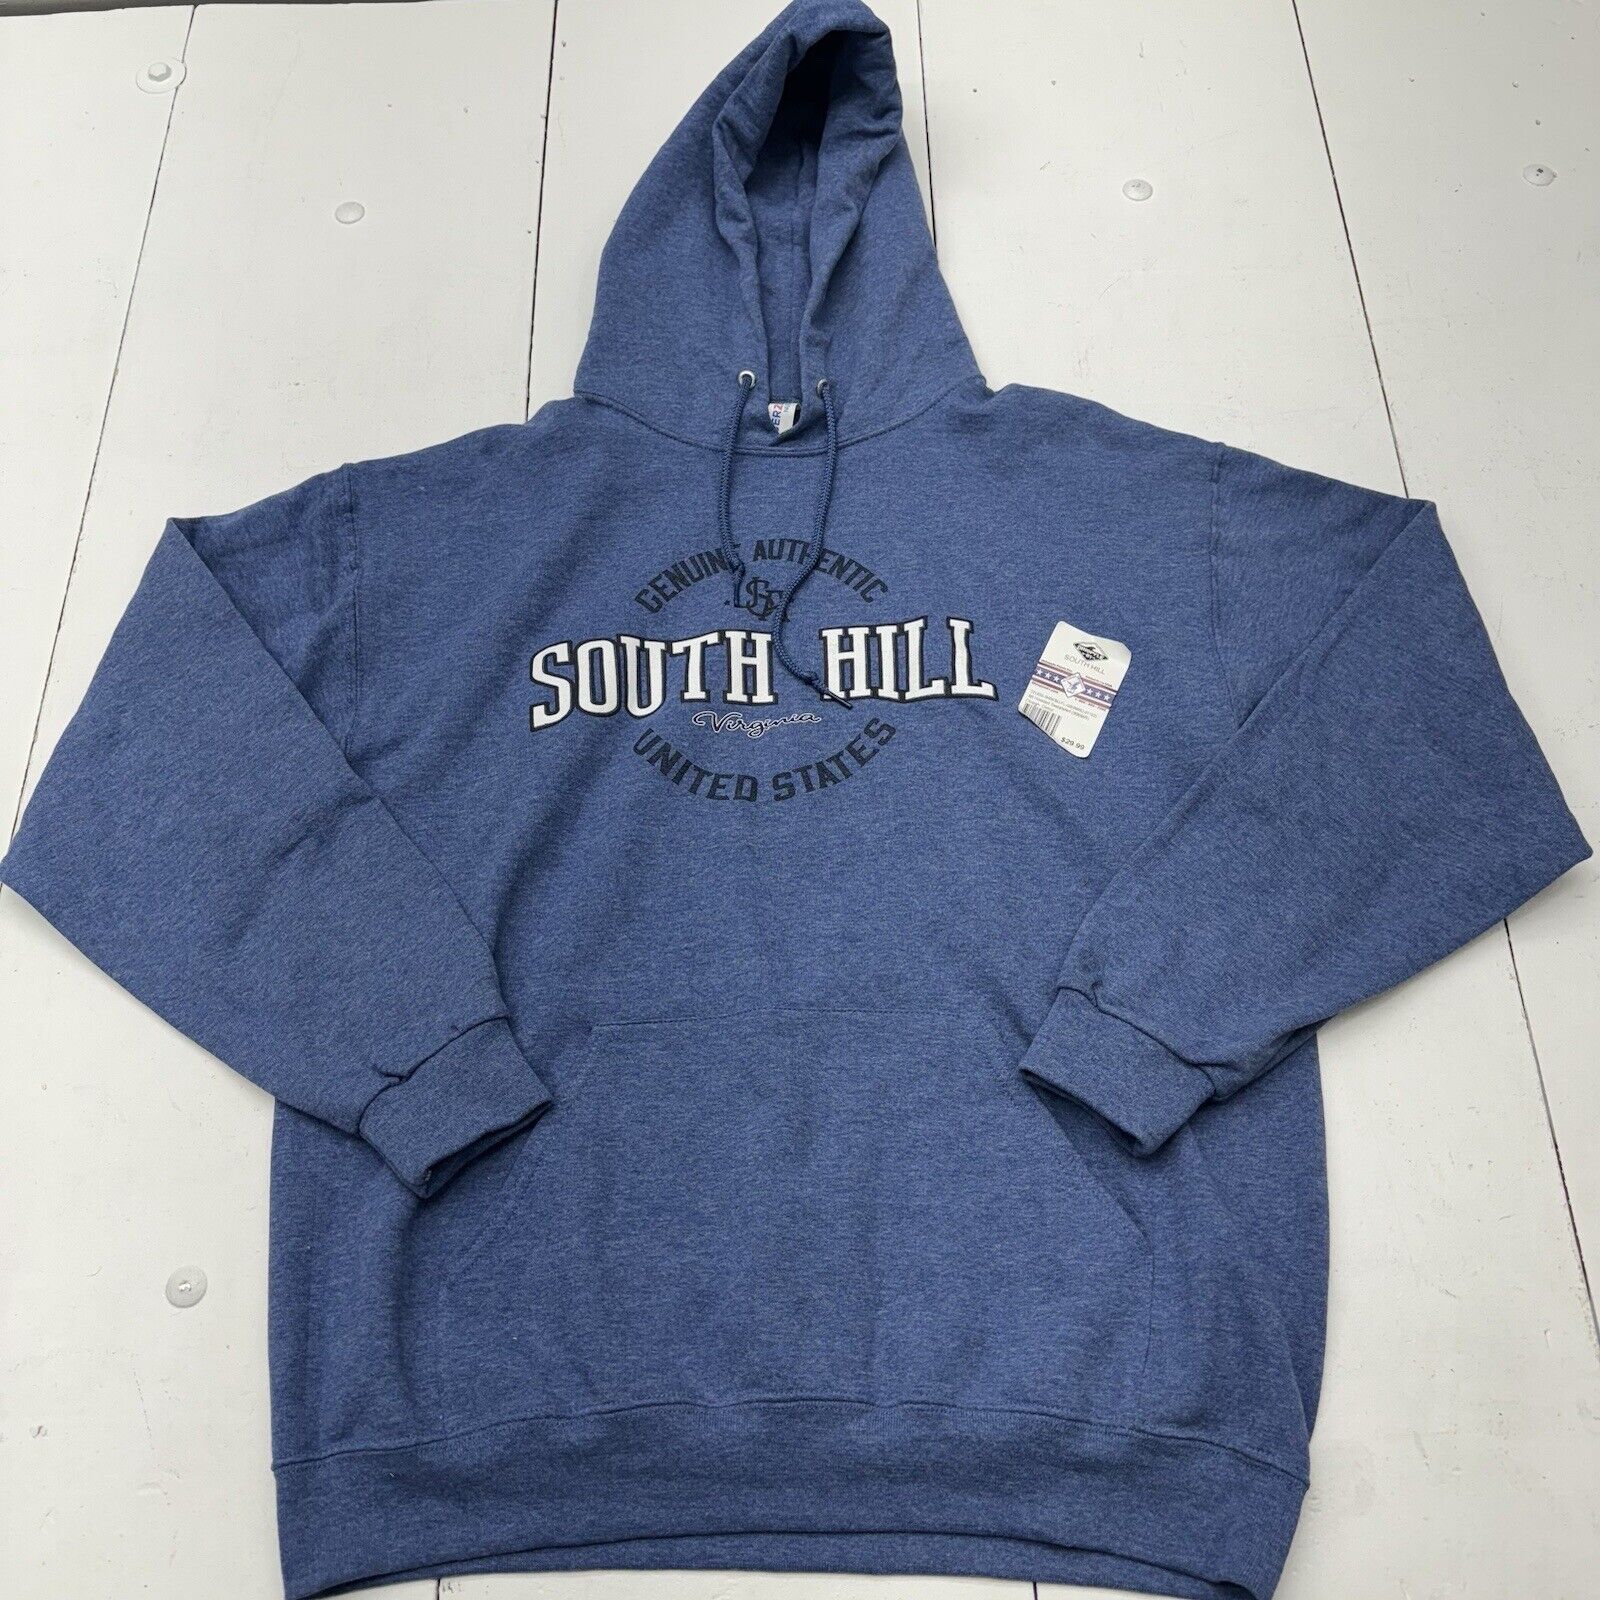 Jerzees Nublend Blue South Hill Virginia Hooded Sweatshirt Front Graphic Adult L